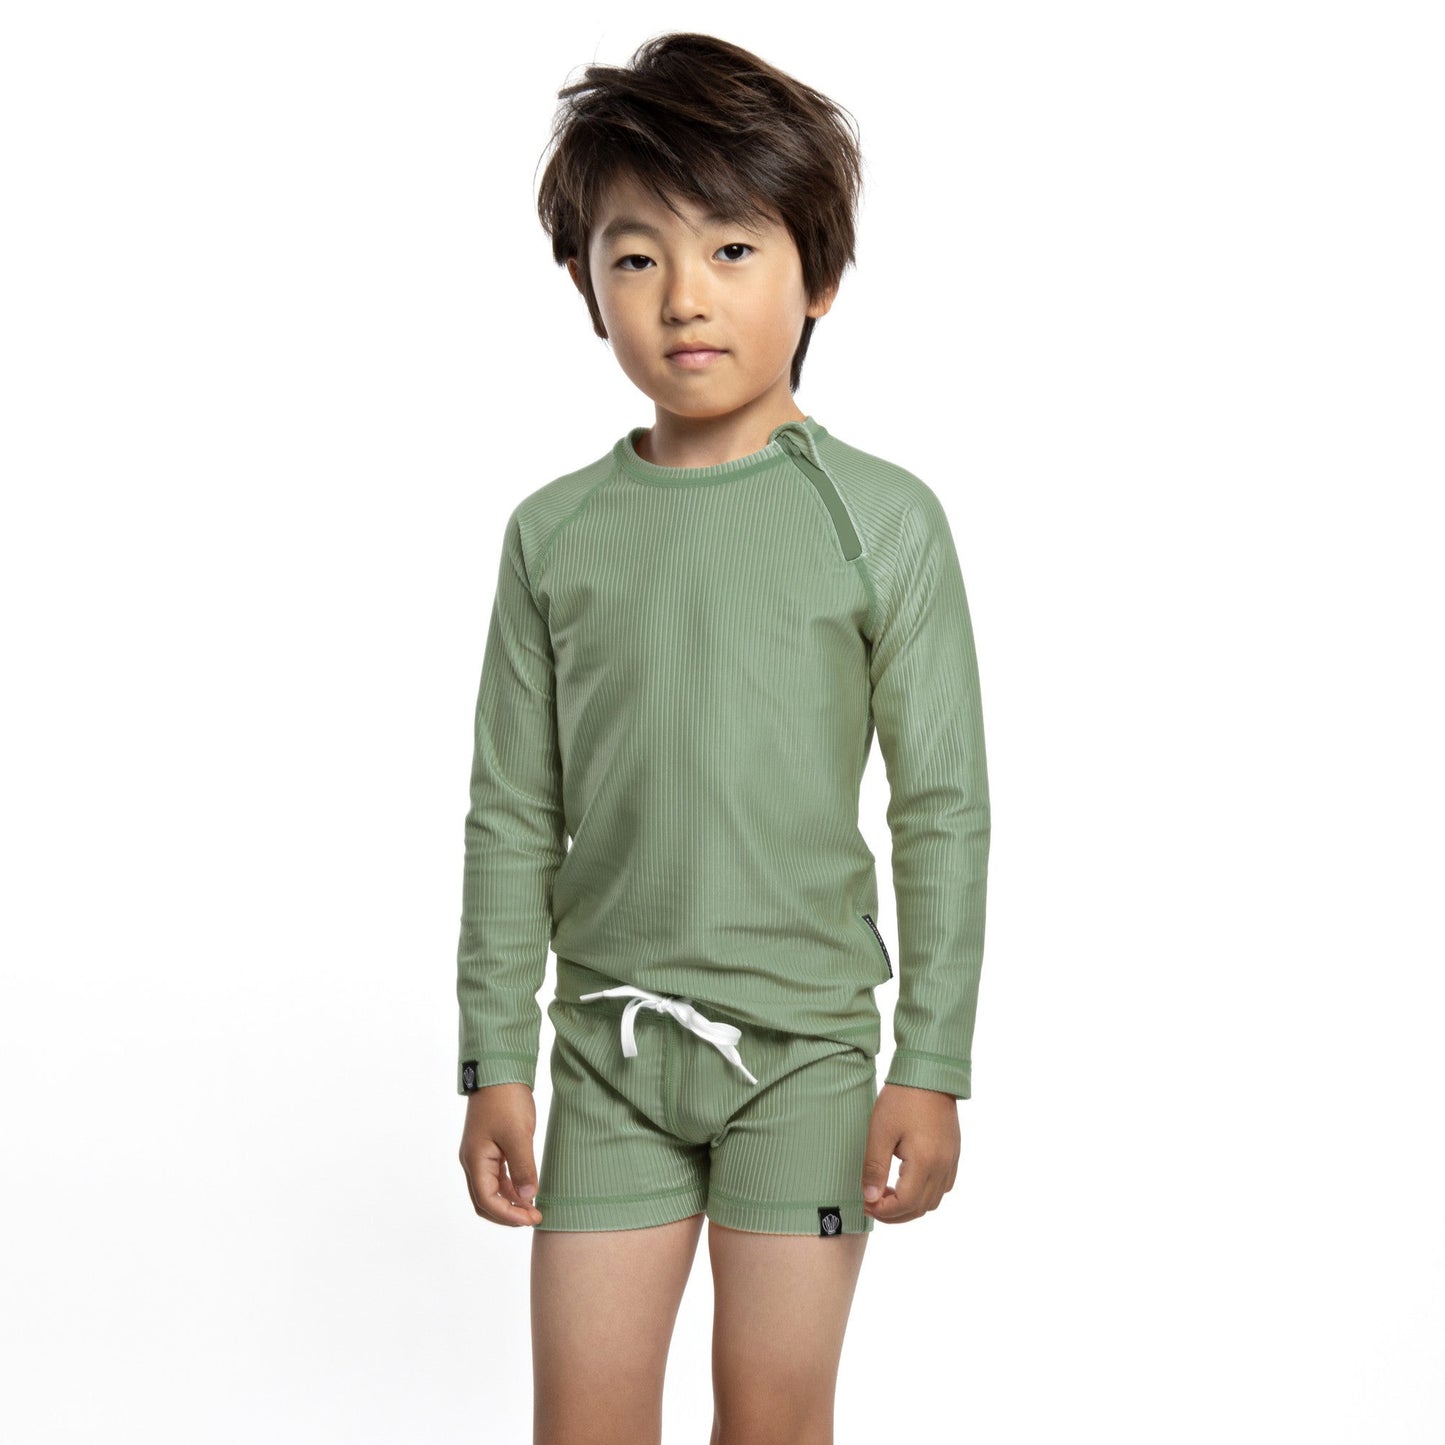 This picture shows a boy in a ribbed basil green, UPF50+ long sleeve rashie